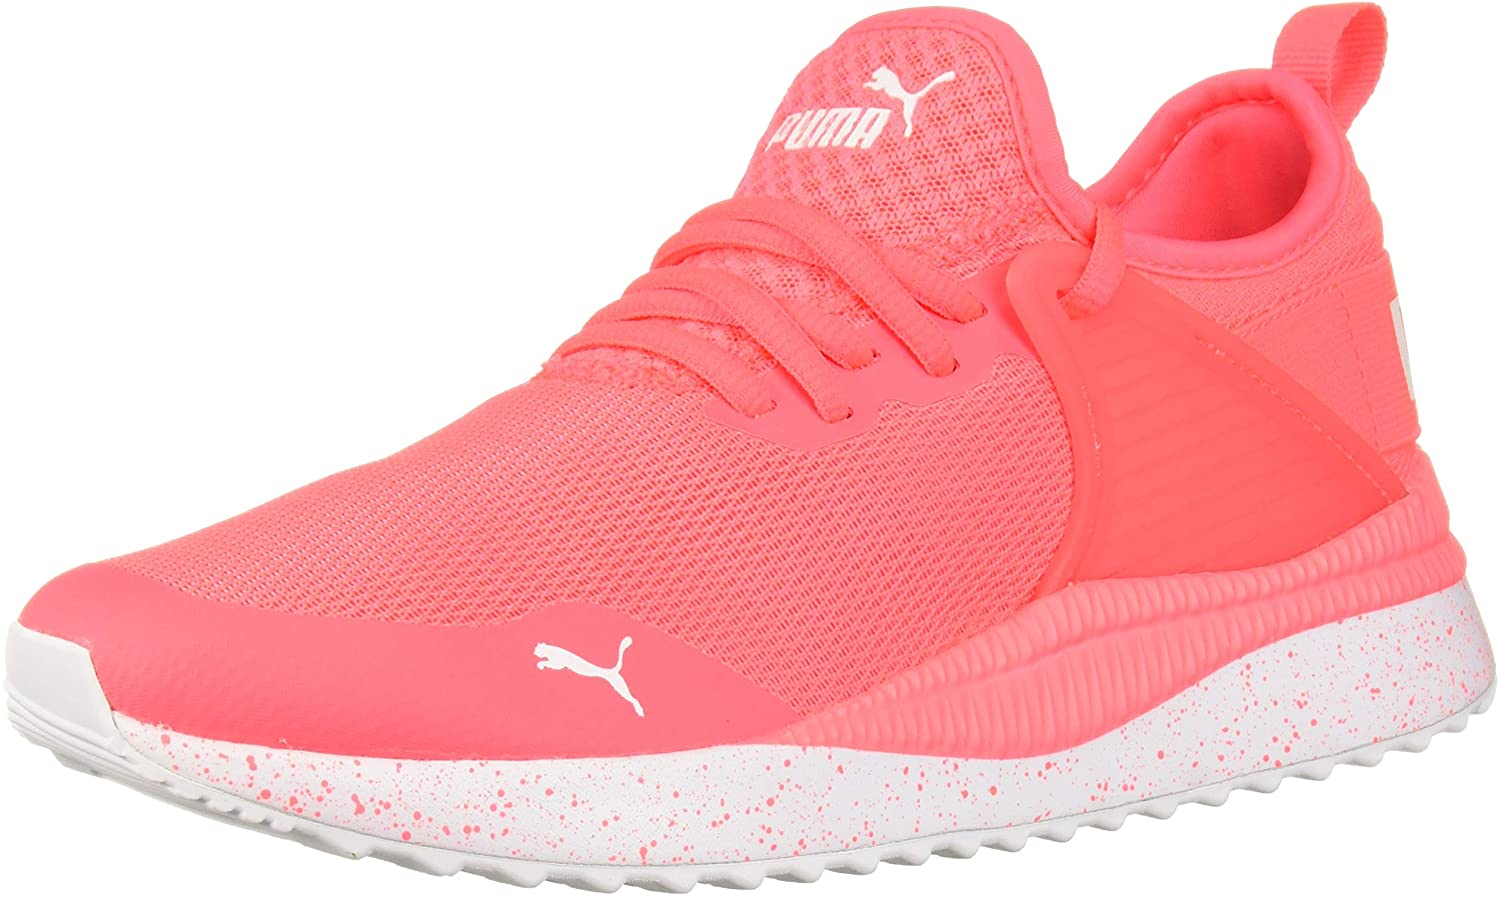 puma pacer next cage women's running shoes